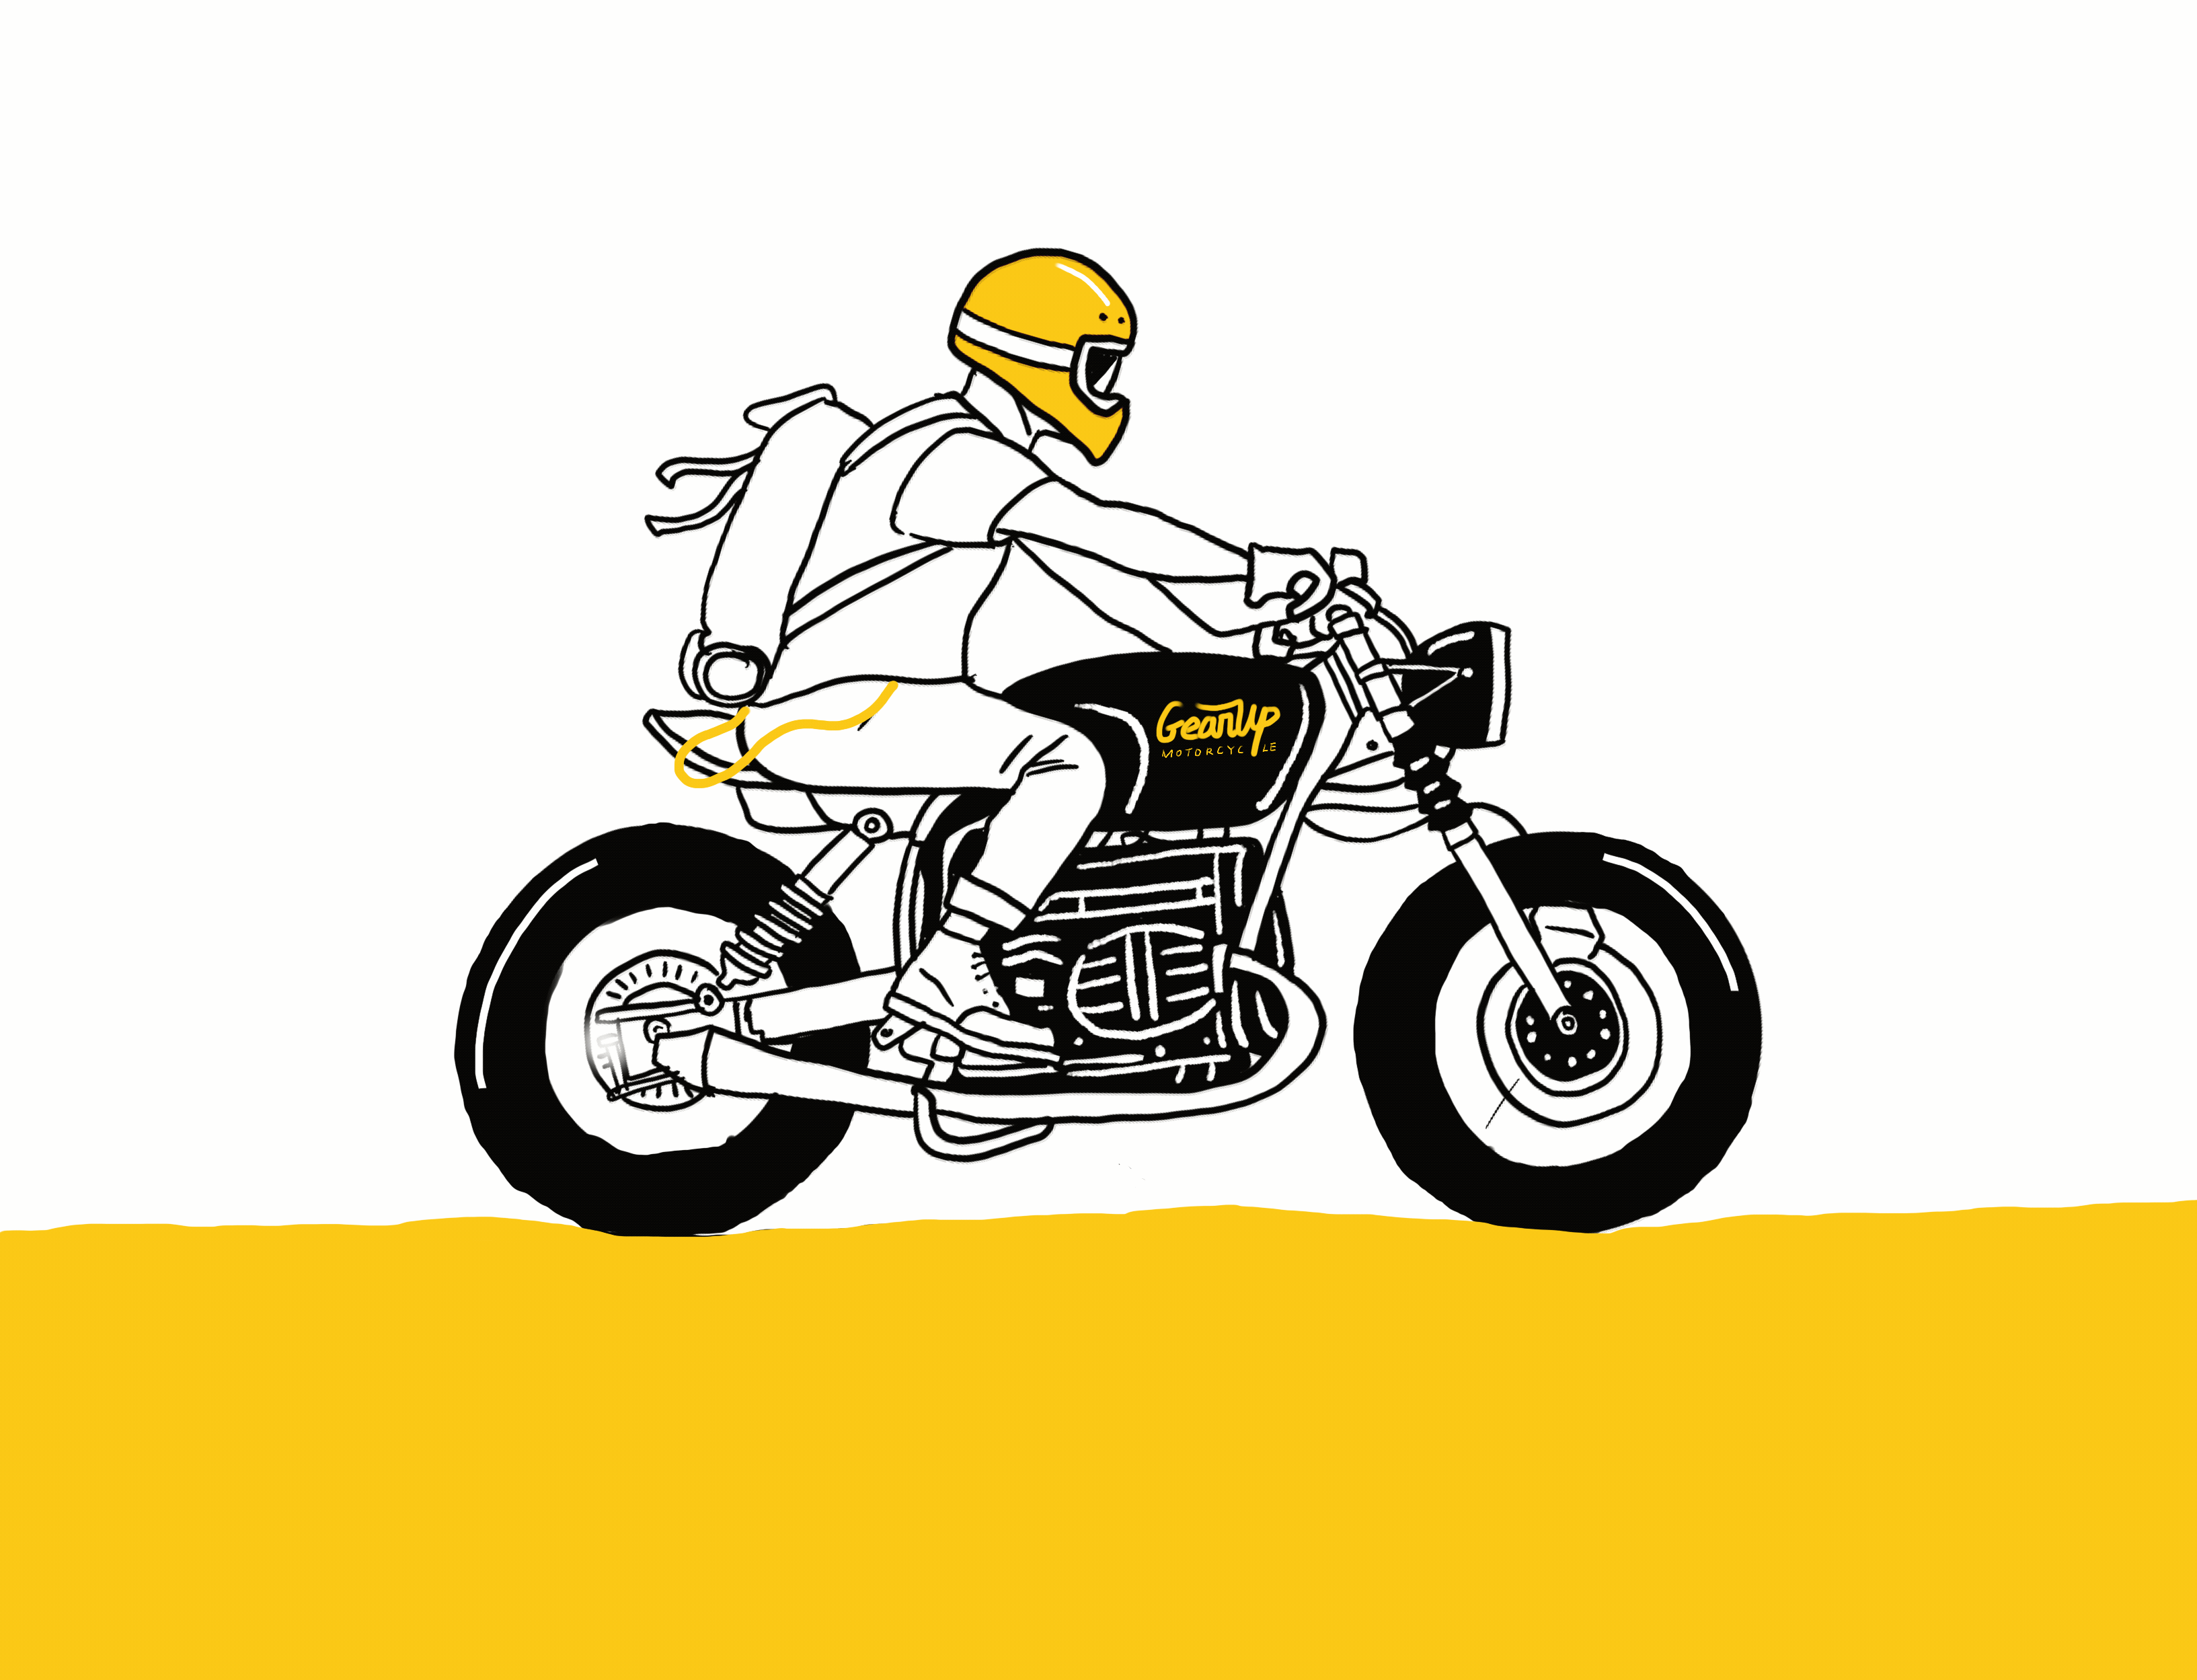 Gear Up motorcycle. | SHOP  ALL - NEW ARRIVAL